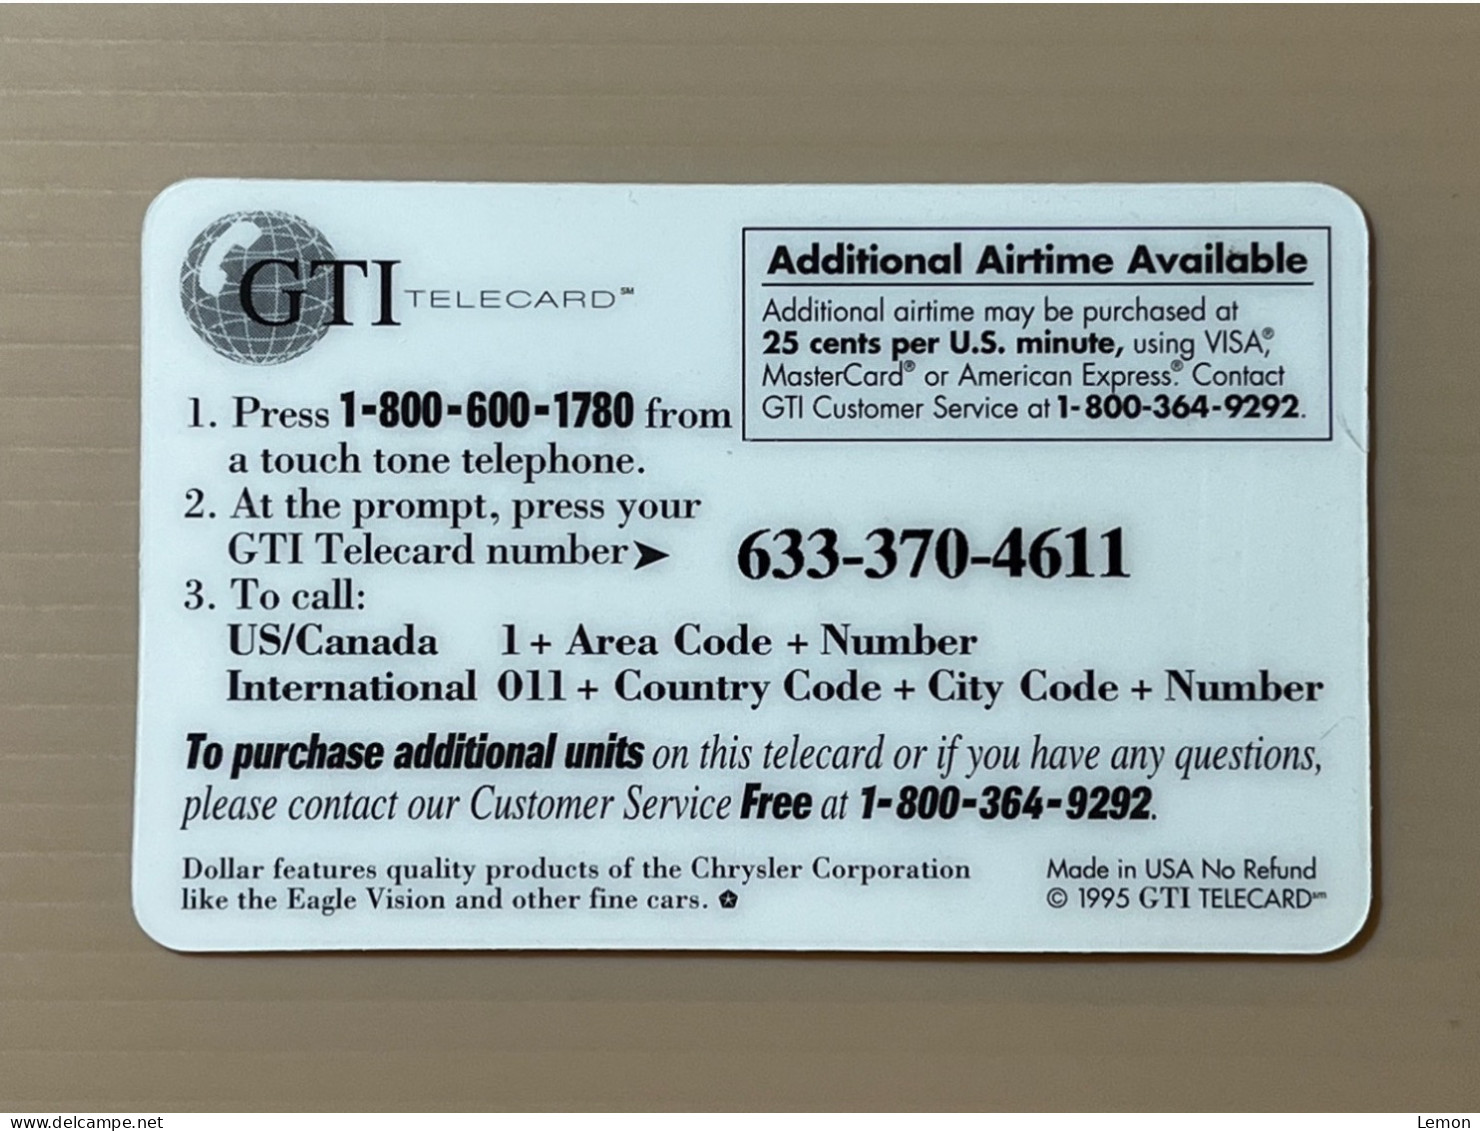 Mint USA UNITED STATES America Prepaid Telecard Phonecard, Dollar - Eagle Car SAMPLE CARD, Set Of 1 Mint Card - Collections